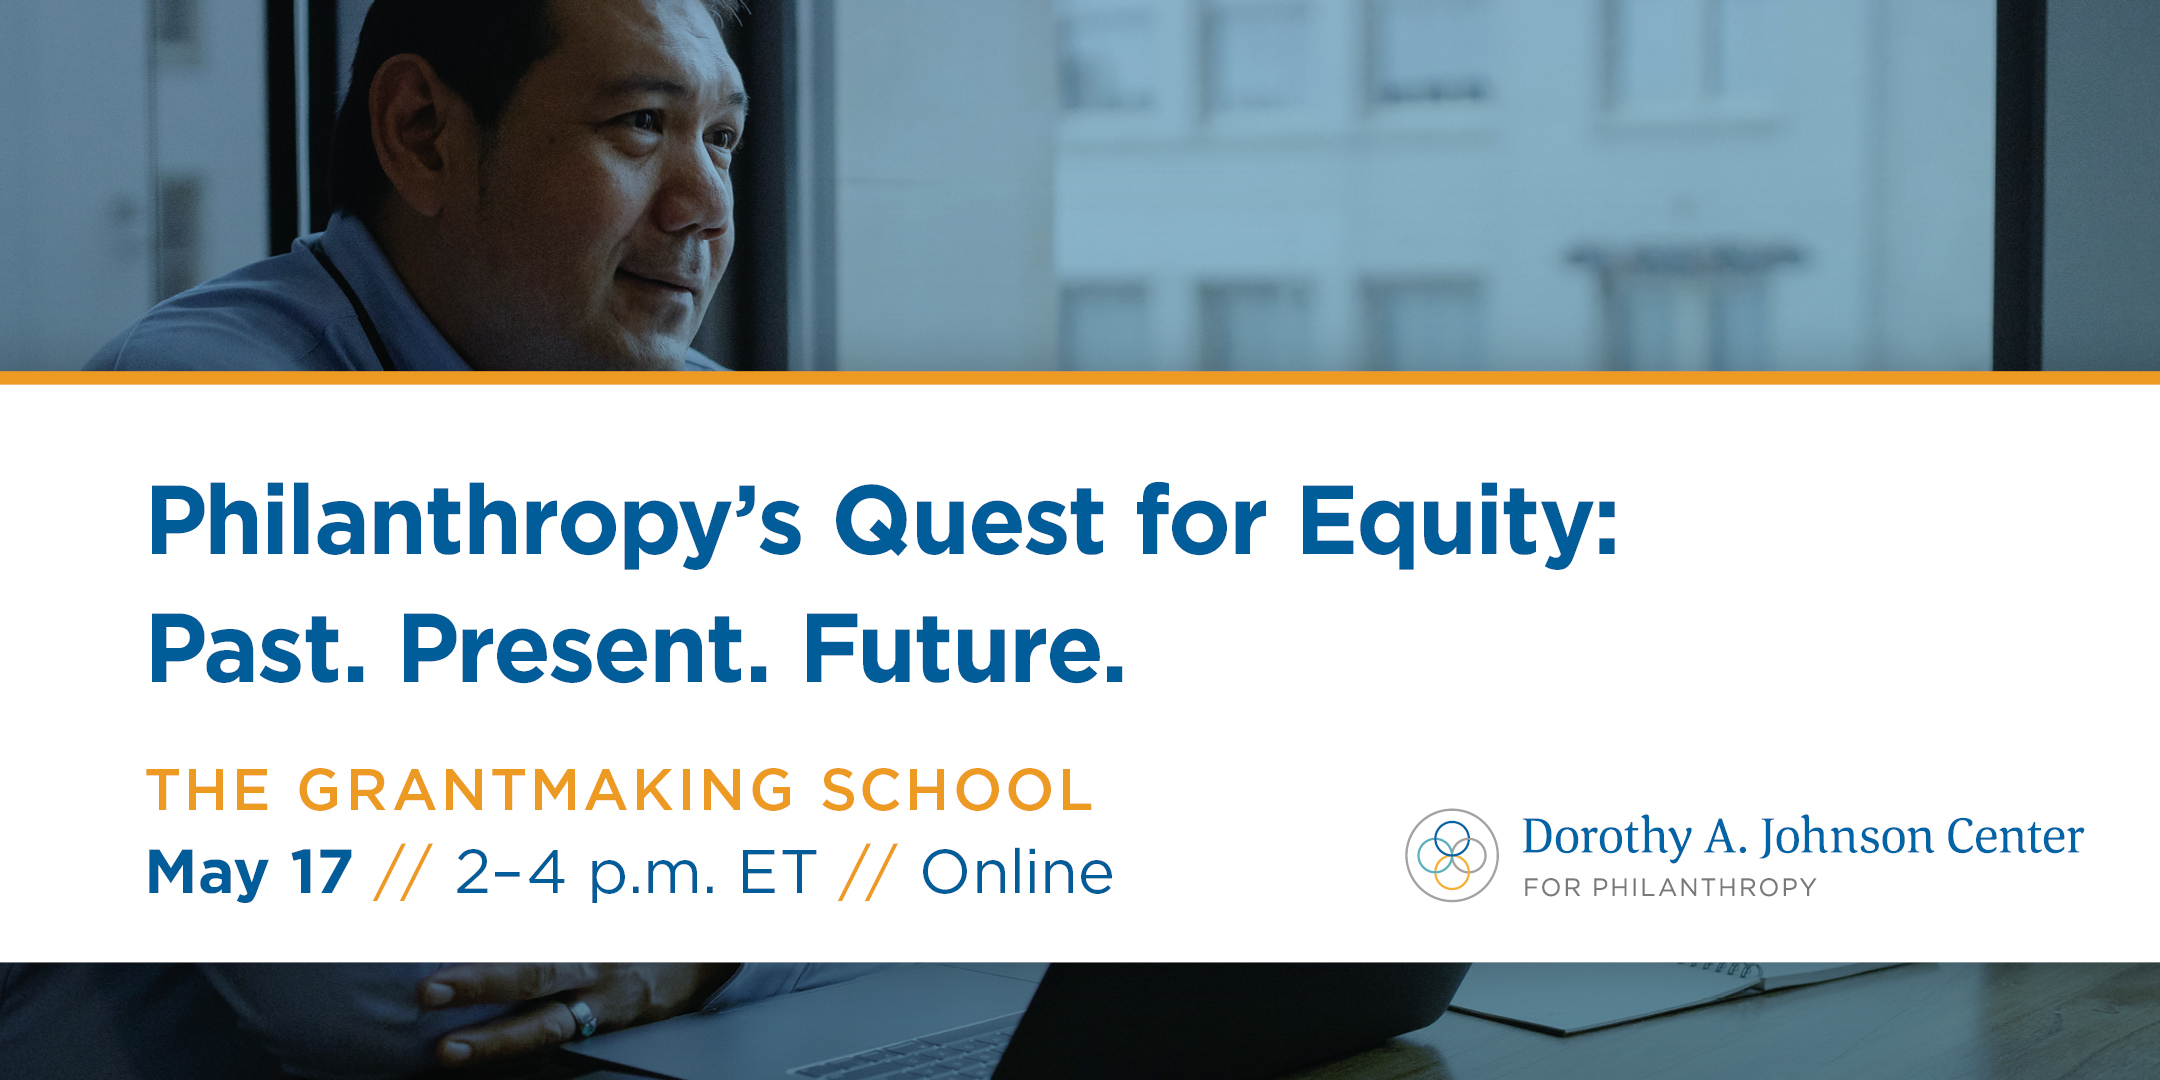 Philanthropy’s Quest for Equity: Past. Present. Future.